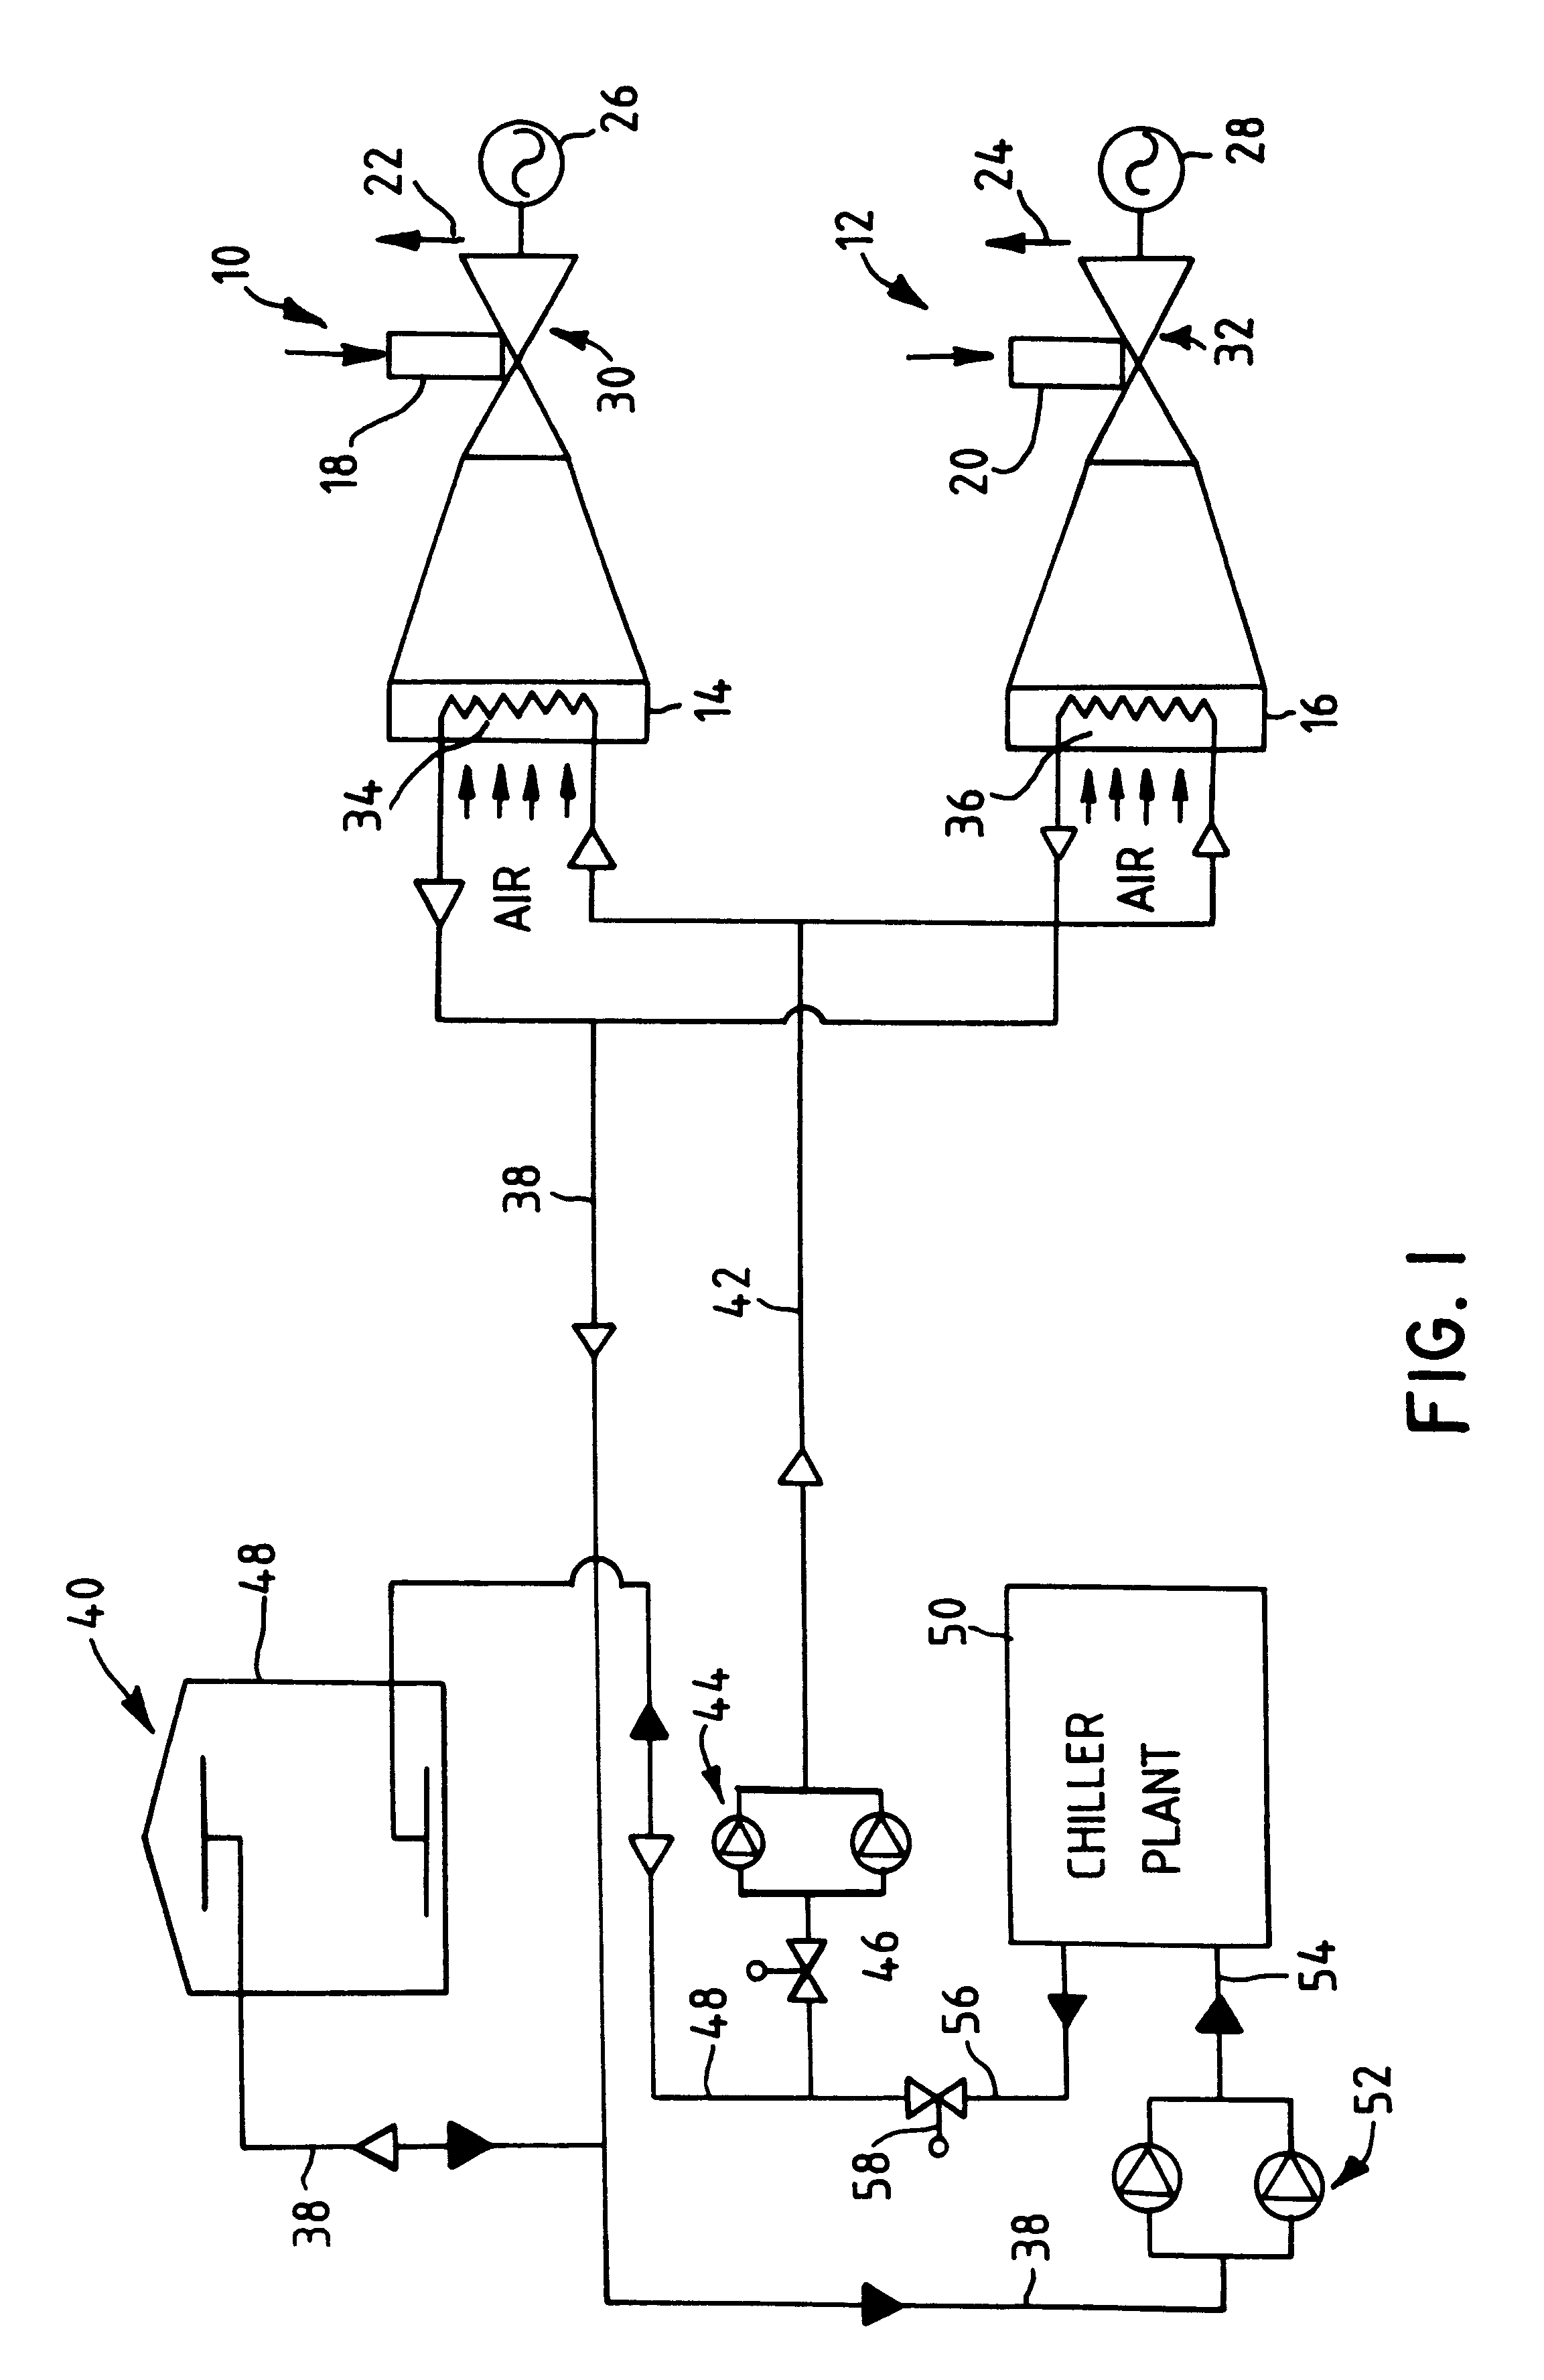 Method and apparatus for enhancing power output and efficiency of combustion turbines